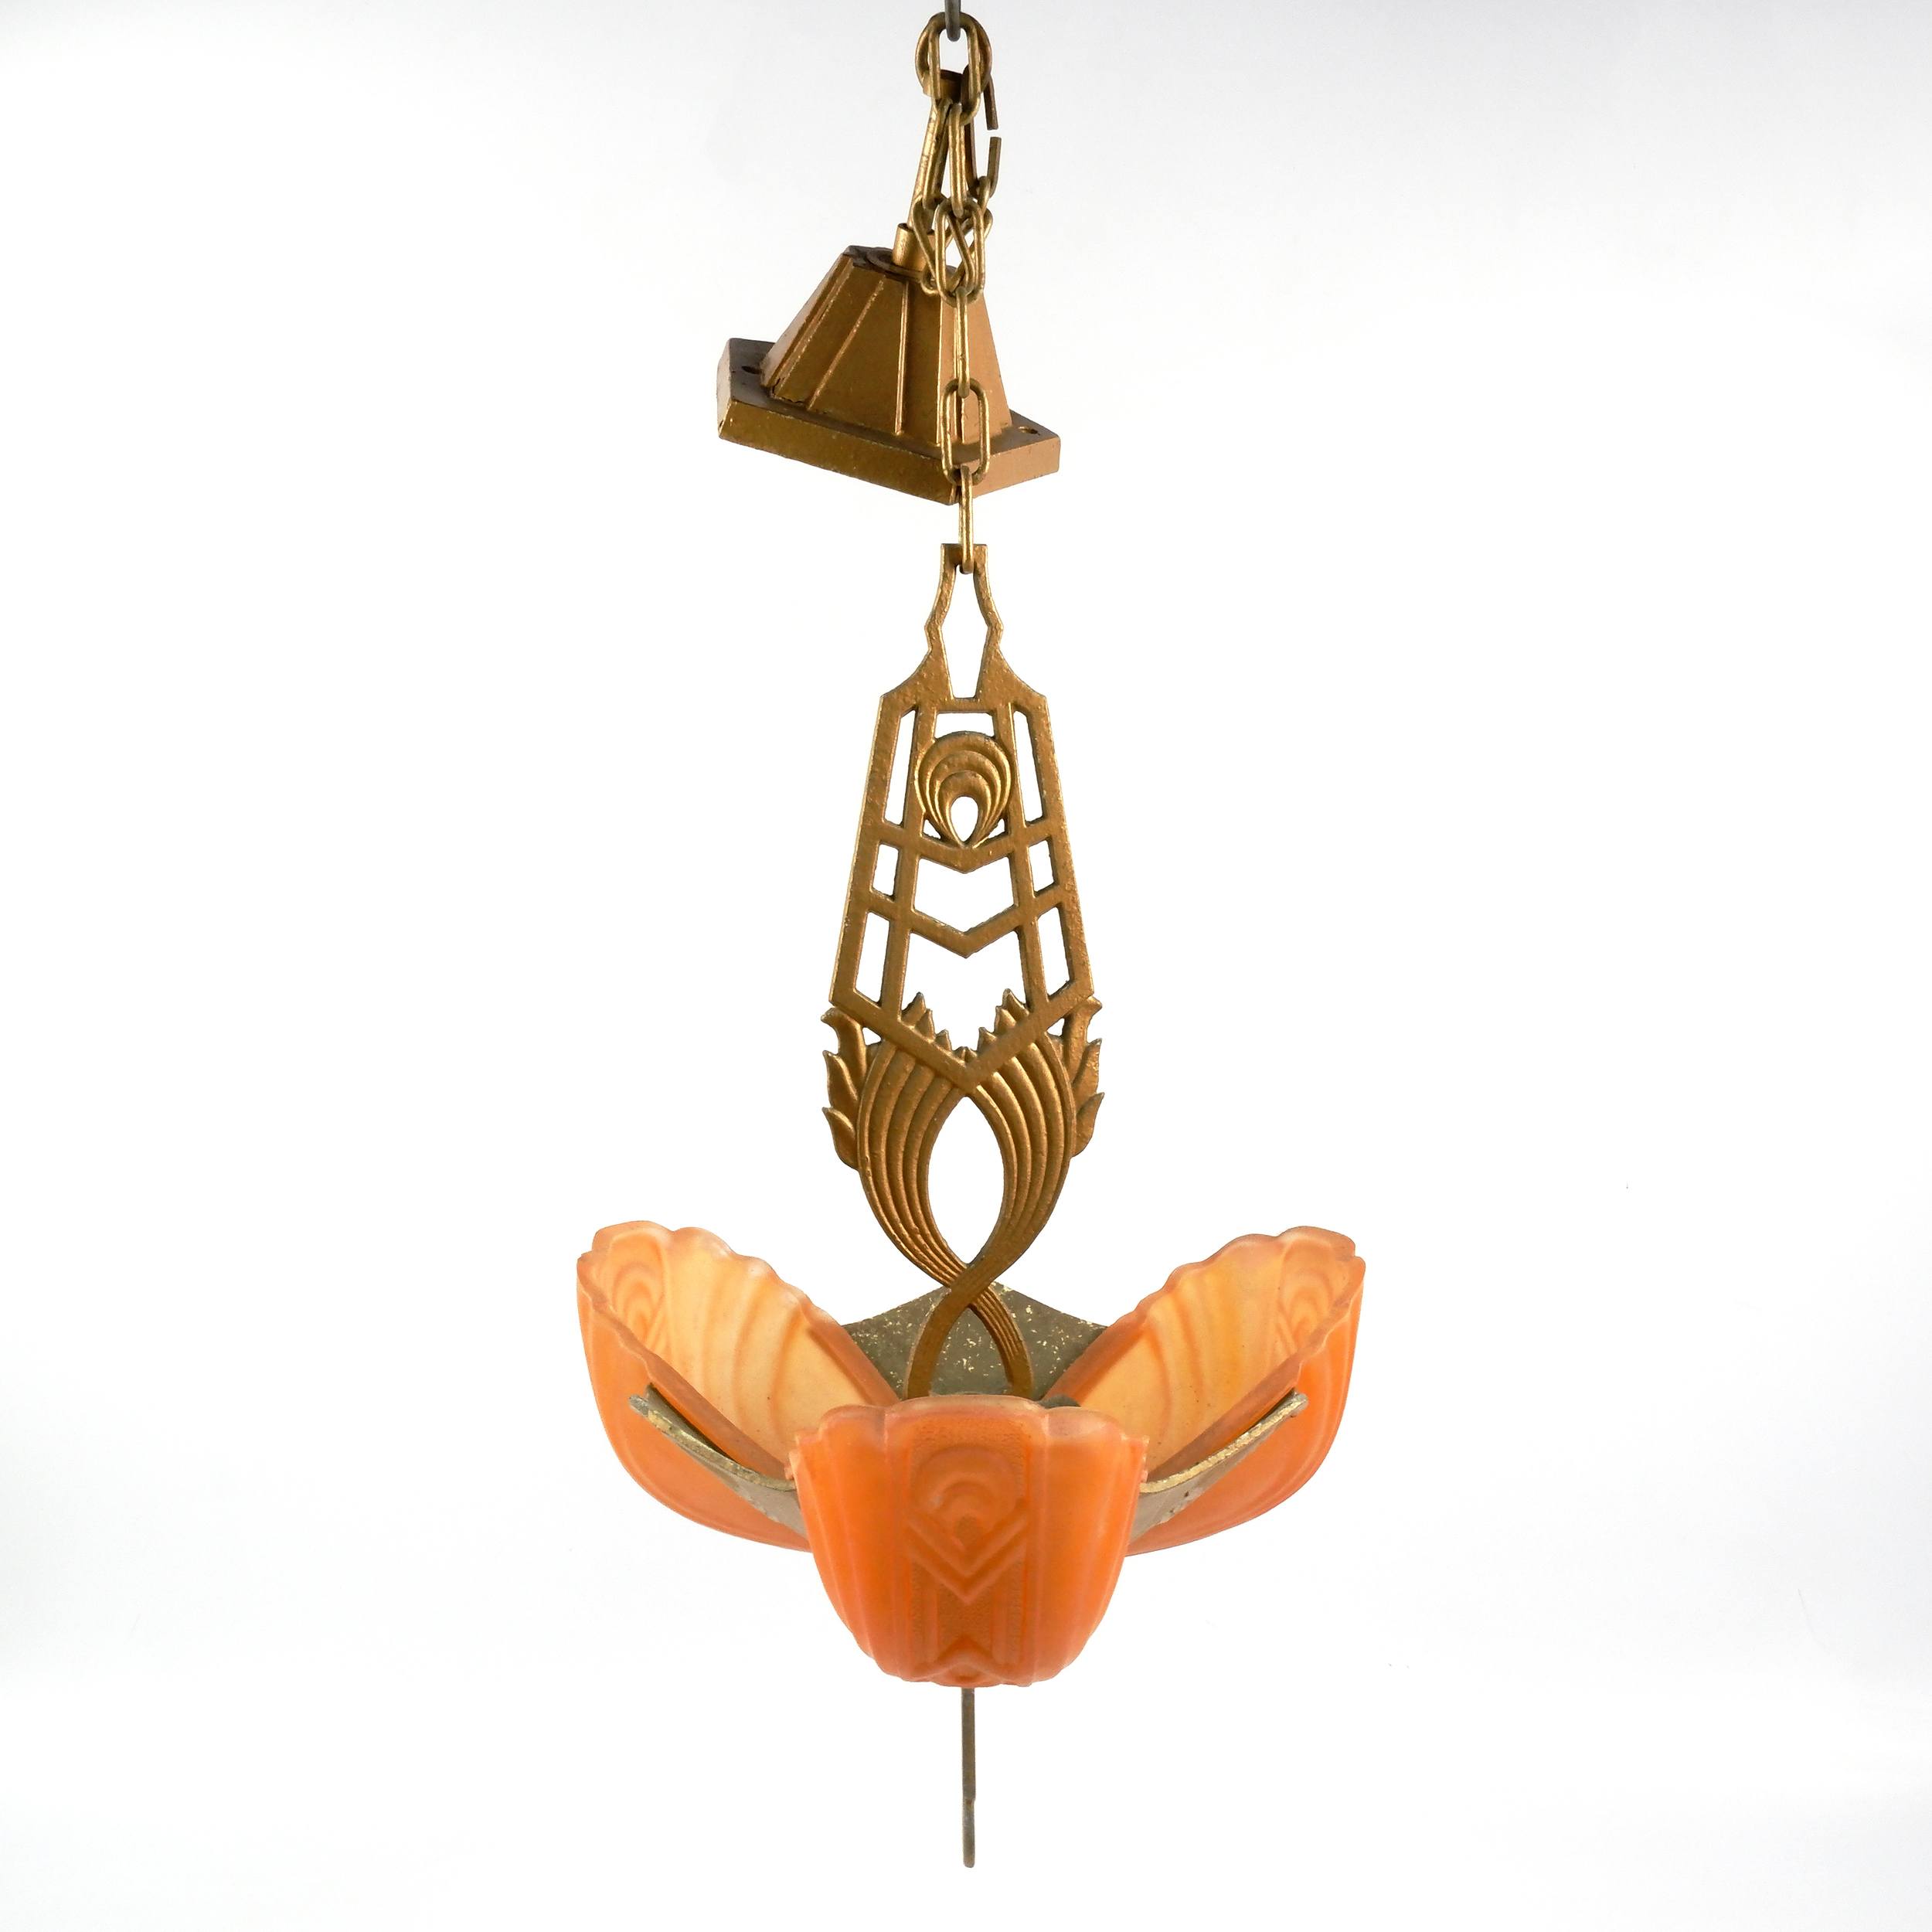 'Art Deco Patinated Metal Pendant Light Fitting with Three Slipper Opaque Moulded Amber Glass Shades, Circa 1930s'